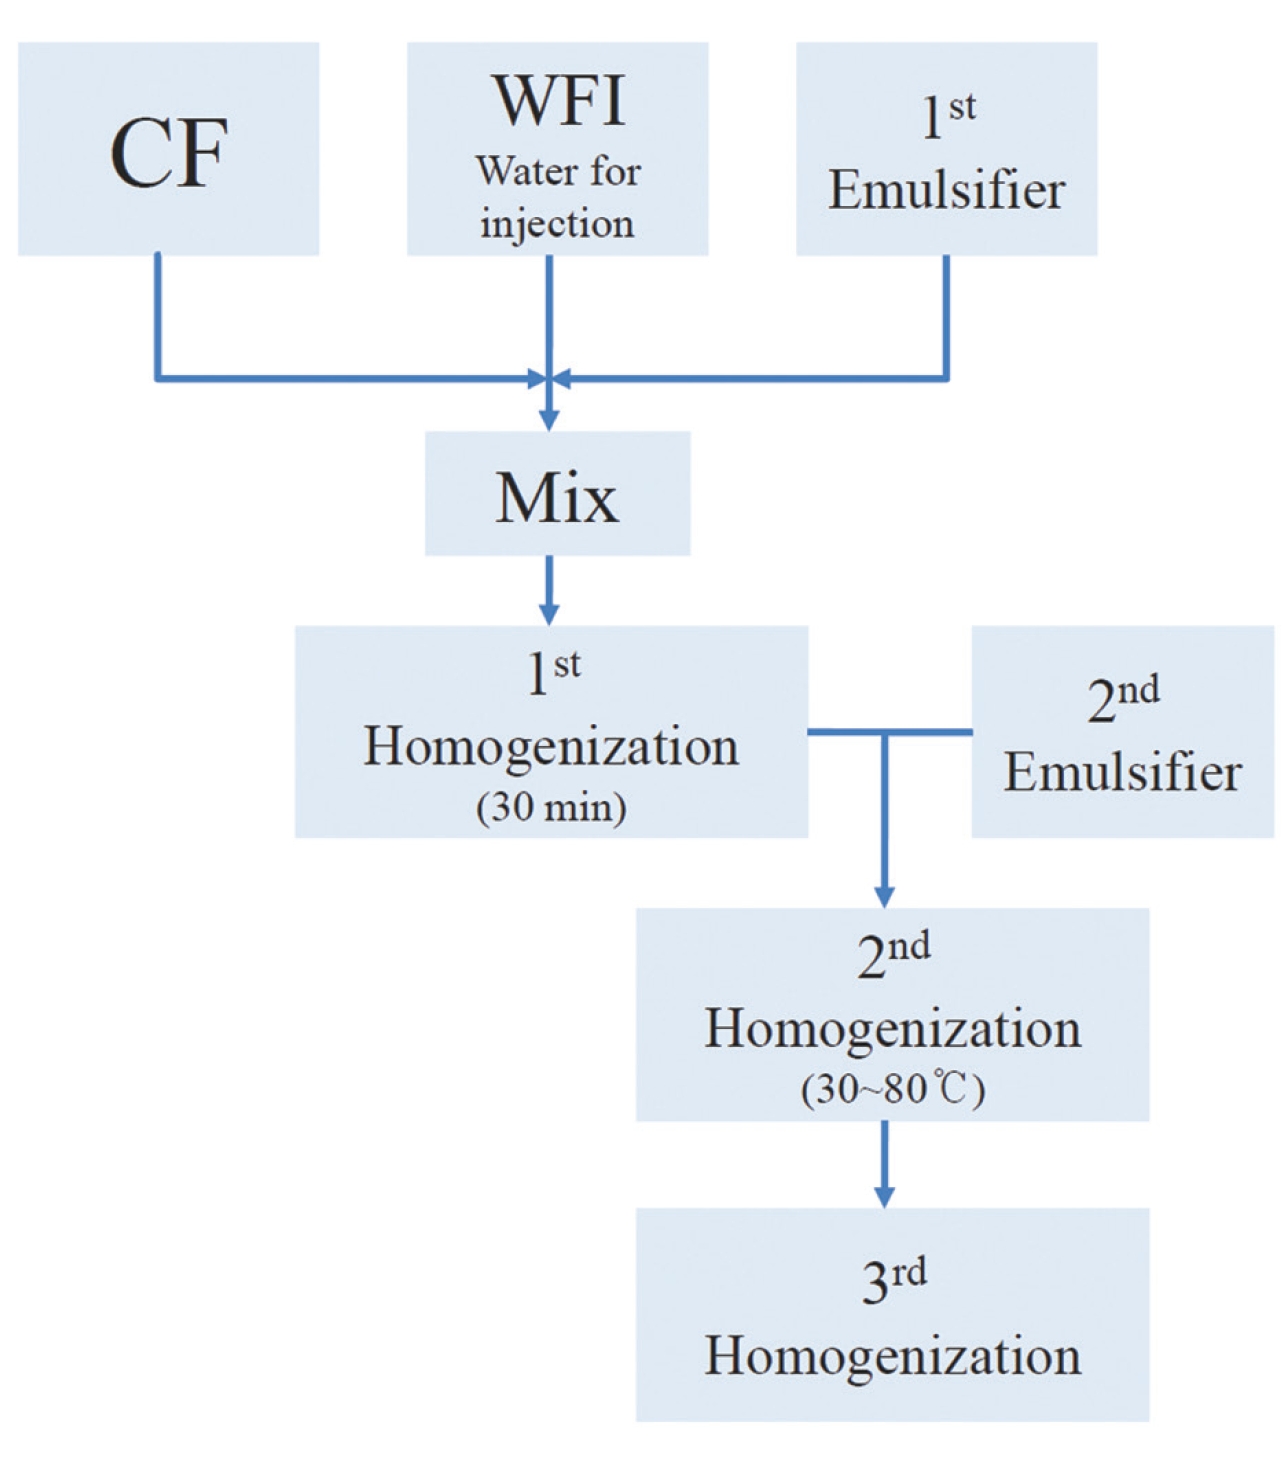 Flow diagram showing the manufacturing process of Water
soluble Carthami-flos herbal acupuncture.